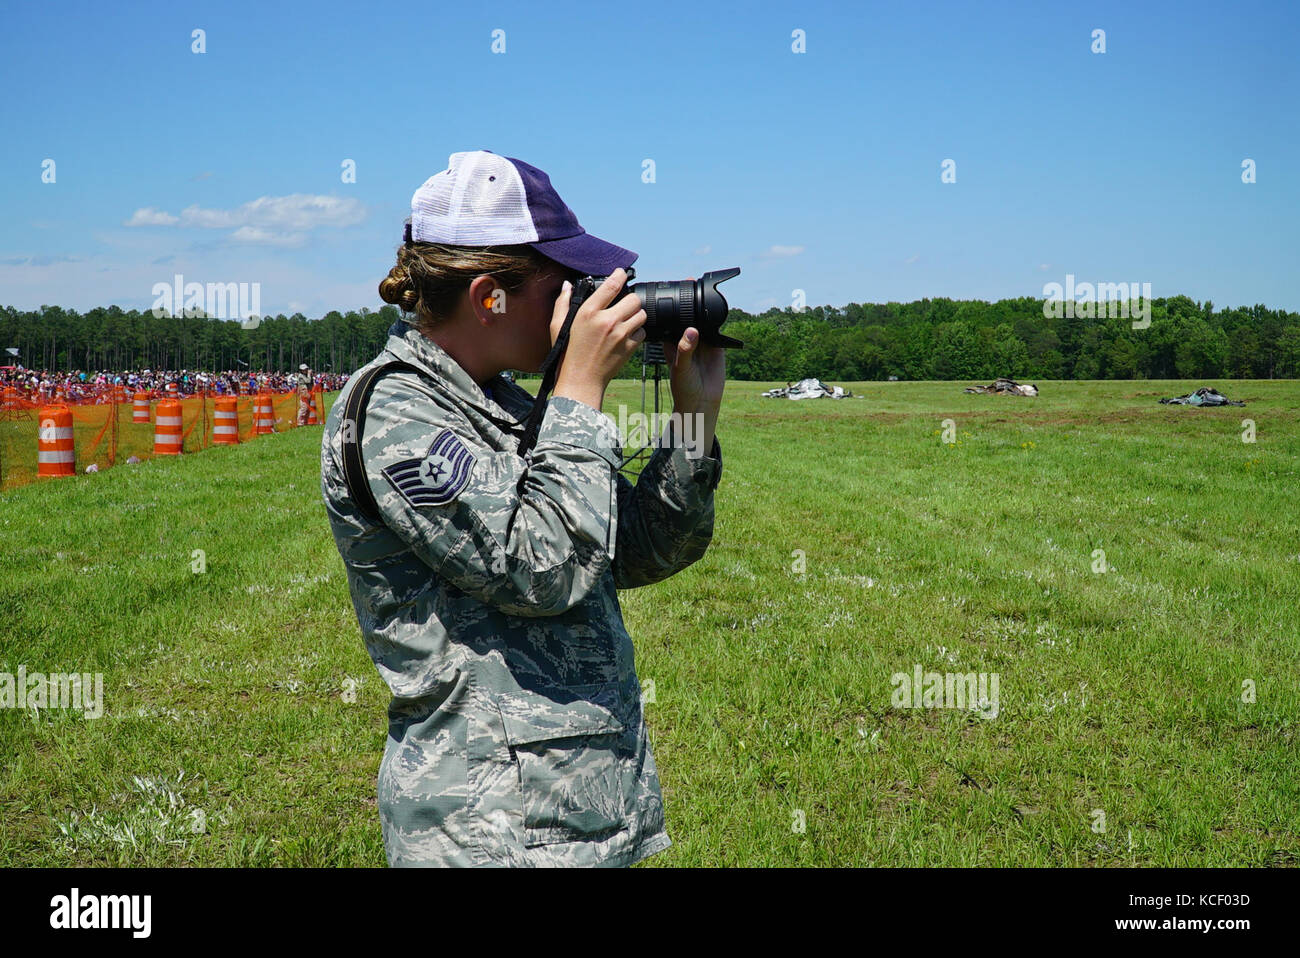 U.S. Air Force Tech Sgt. Nicole Szews from the 169th Fighter Wing Public Affairs Team captures images during the South Carolina National Guard Air and Ground Expo at McEntire Joint National Guard Base, South Carolina, May 6, 2017. This expo is a combined arms demonstration showcasing the abilities of South Carolina National Guard Airmen and Soldiers while saying thank you for the support of fellow South Carolinians and the surrounding community. (U.S. Army National Guard photo by Capt. Brian Hare) Stock Photo